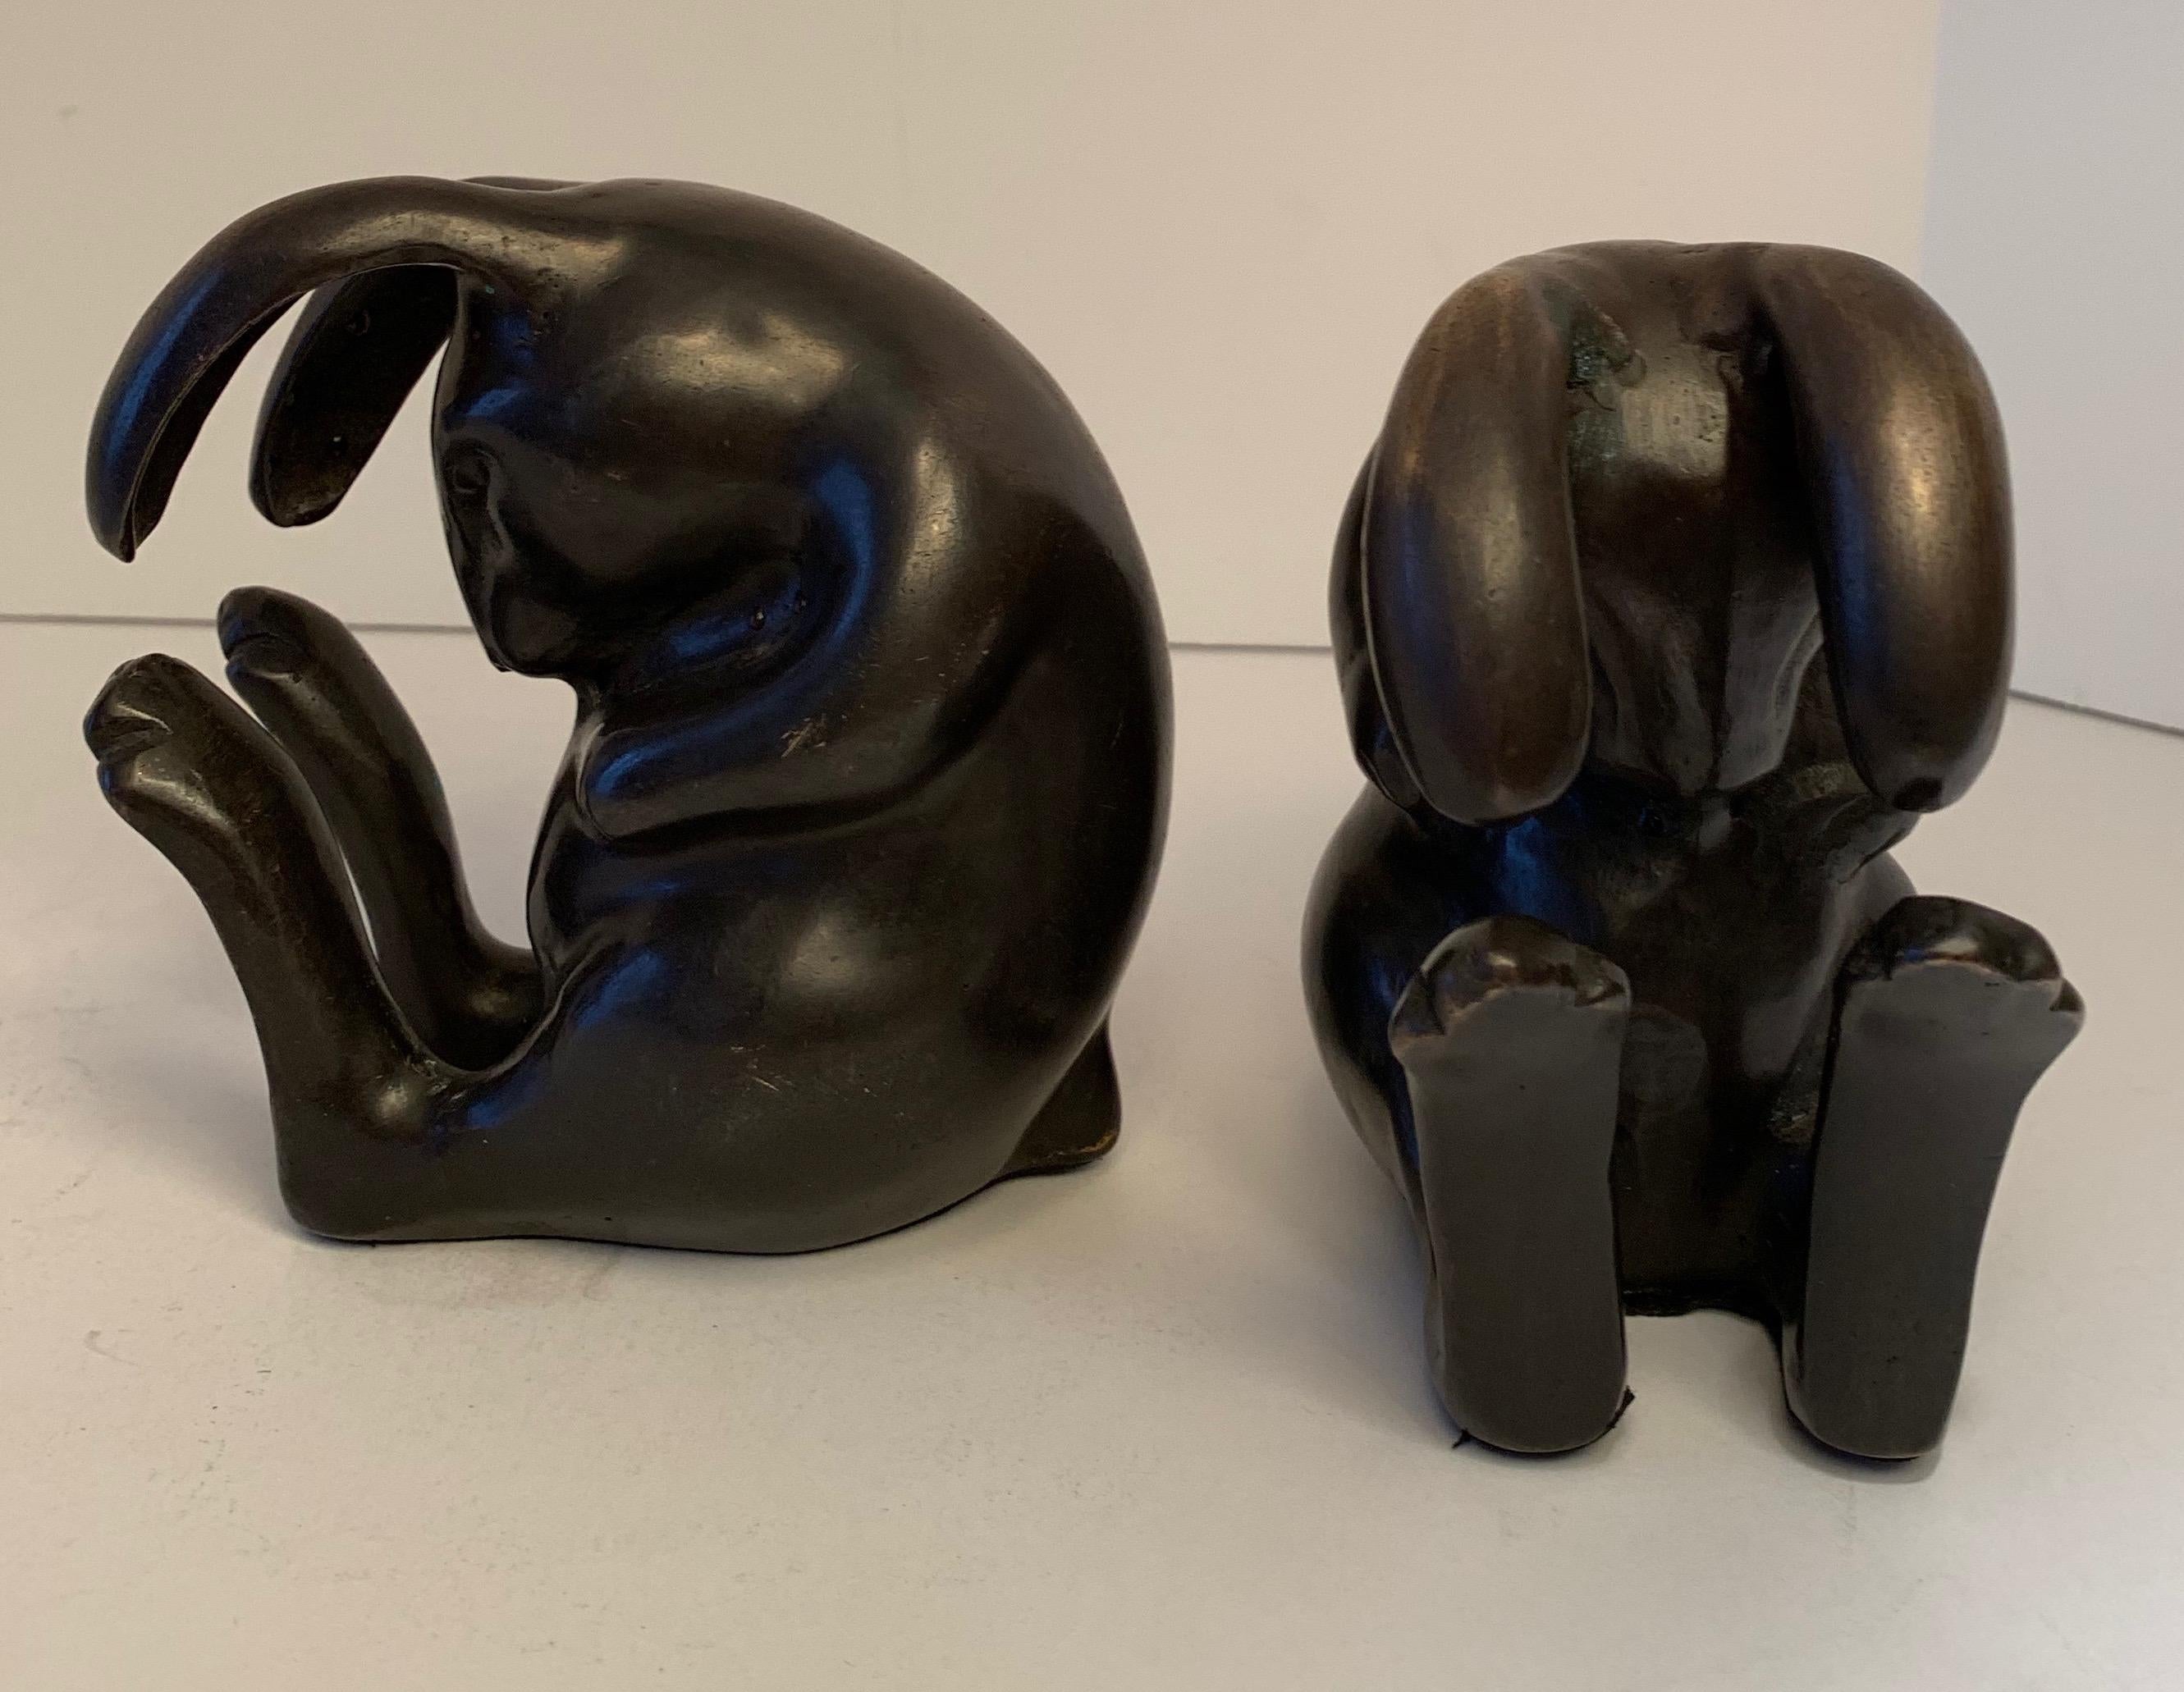 Pair of Japanese style bronze rabbit bookends - a beautiful pair of artfully designed rabbit, or bunny bookends. Perfectly suited for the most artistic of shelves and particularly wonderful in a childs bedroom or playroom.